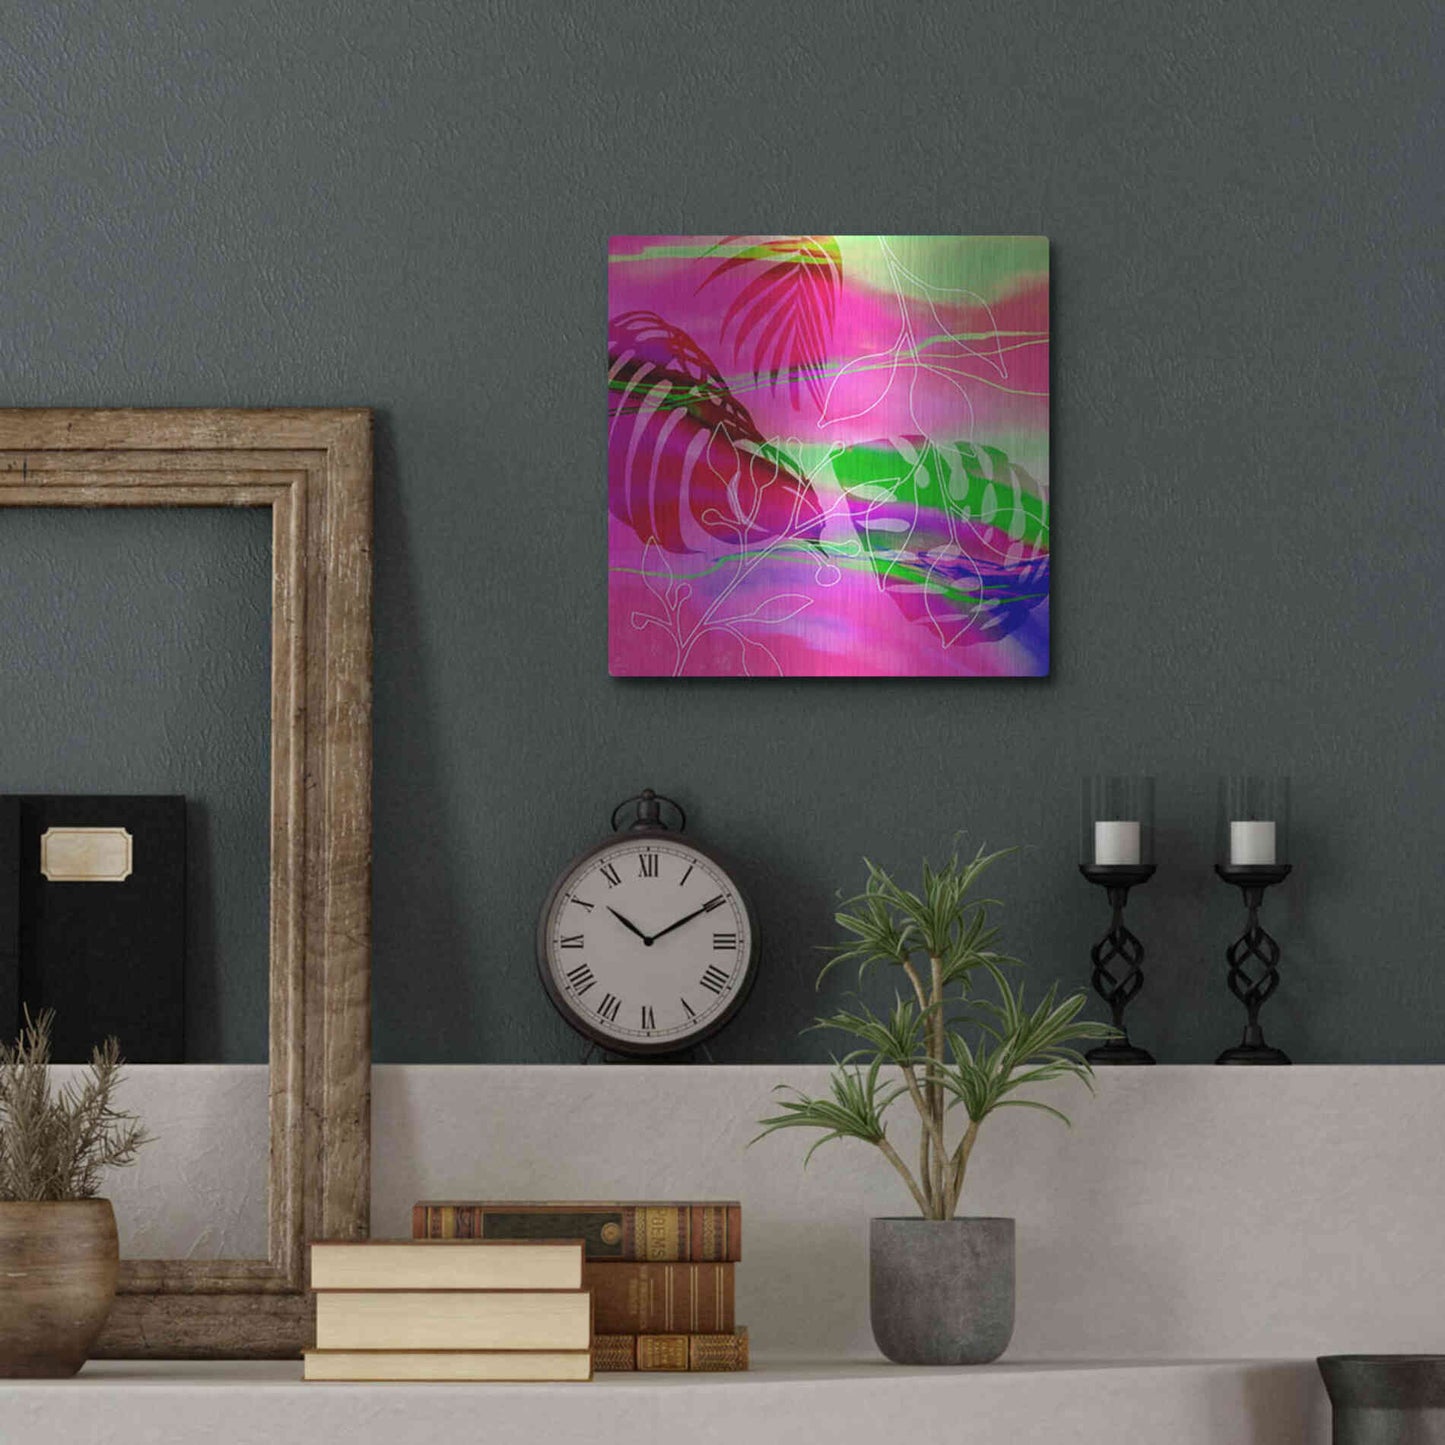 Luxe Metal Art 'Tropical Vibe' by Andrea Haase, Metal Wall At,12x12